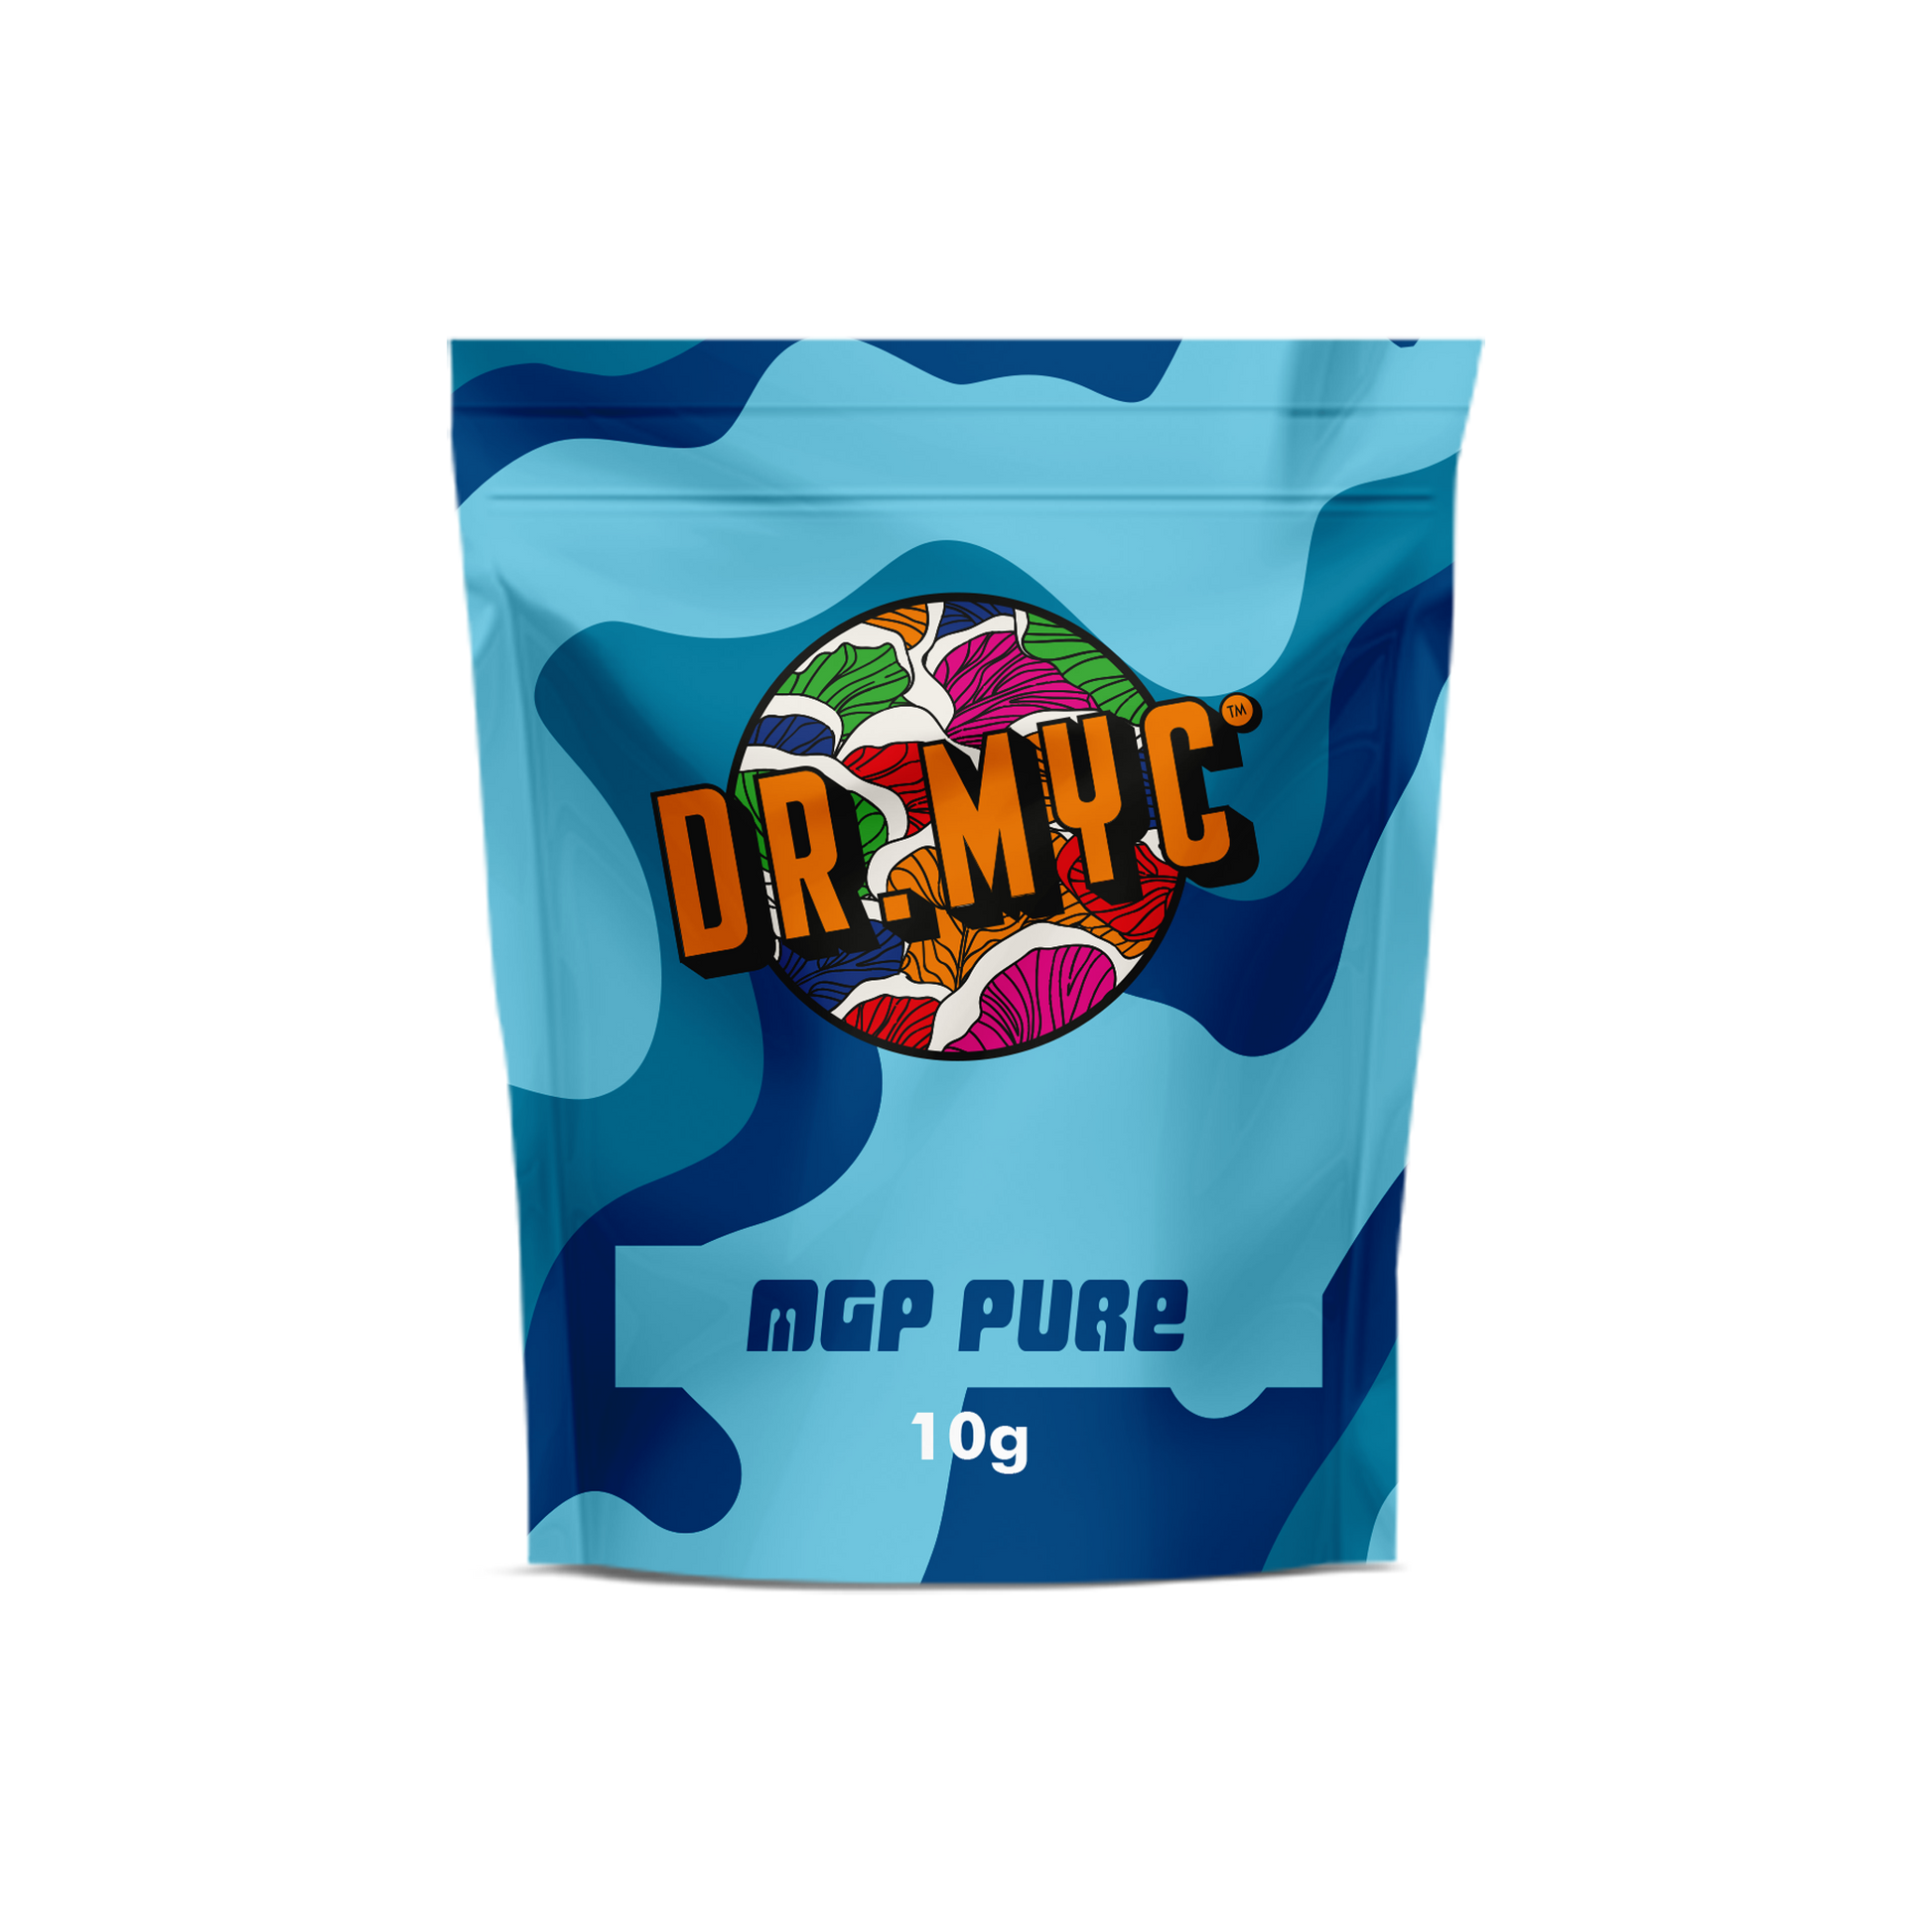 A Small, square blue bag of Dr Myc MGP PURE Mushroom Growth Promoting Bacteria.